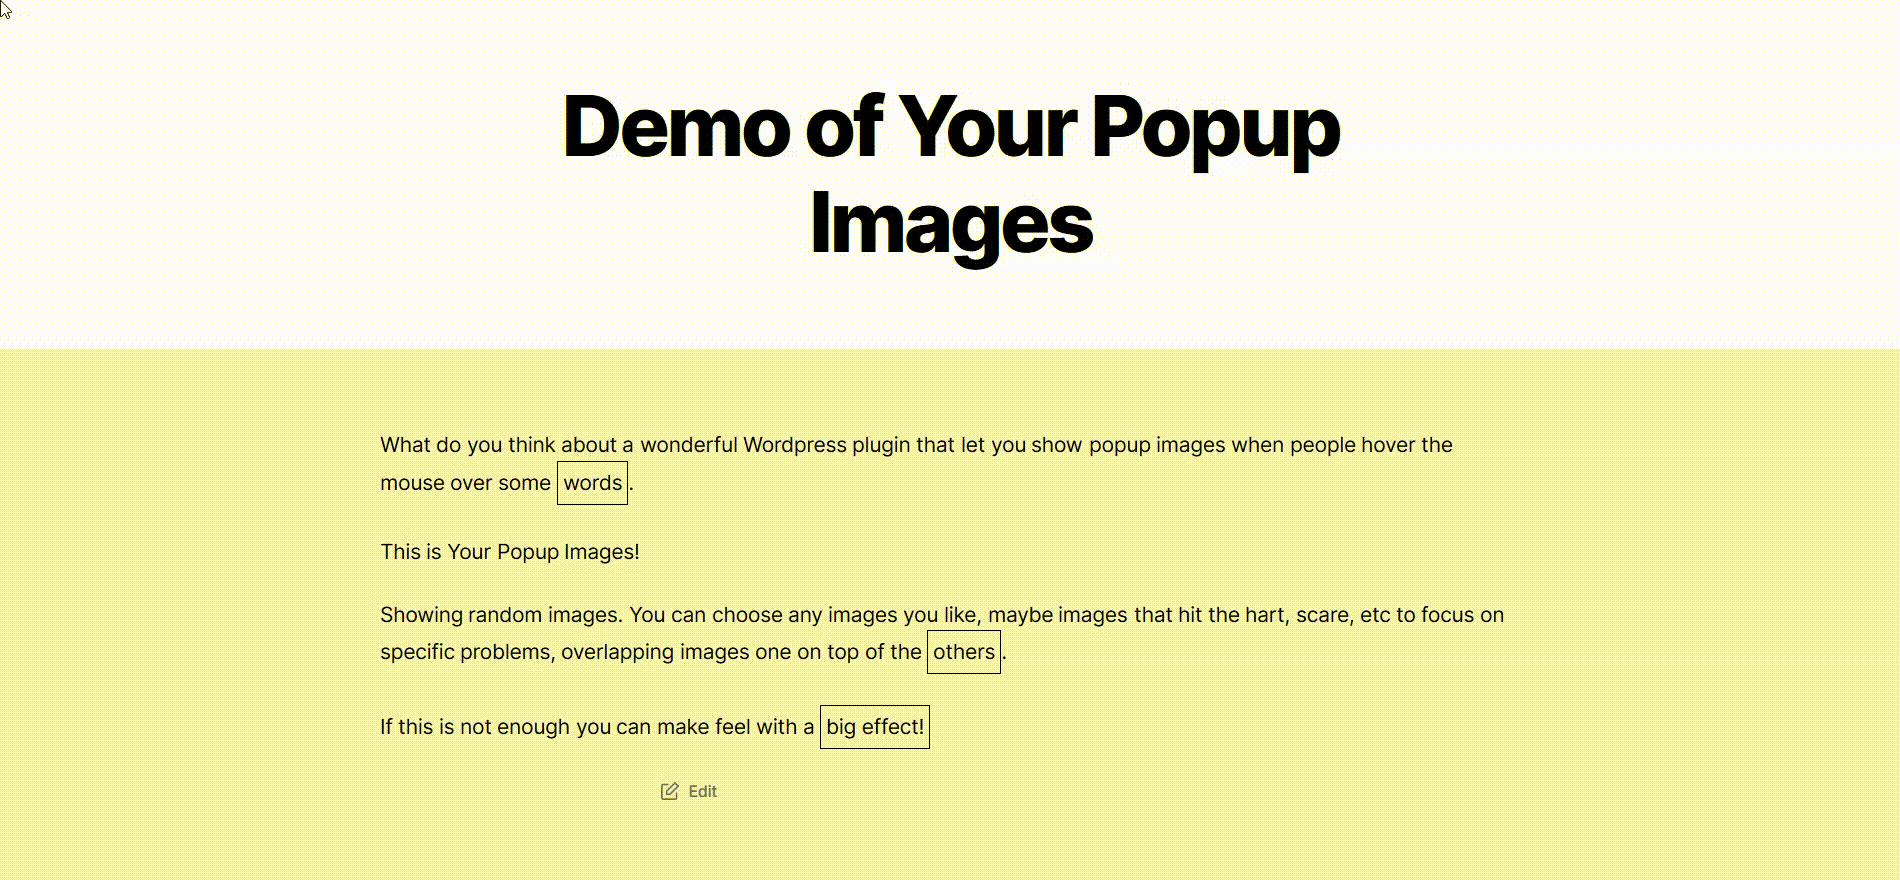 Your Popup Images - Demo